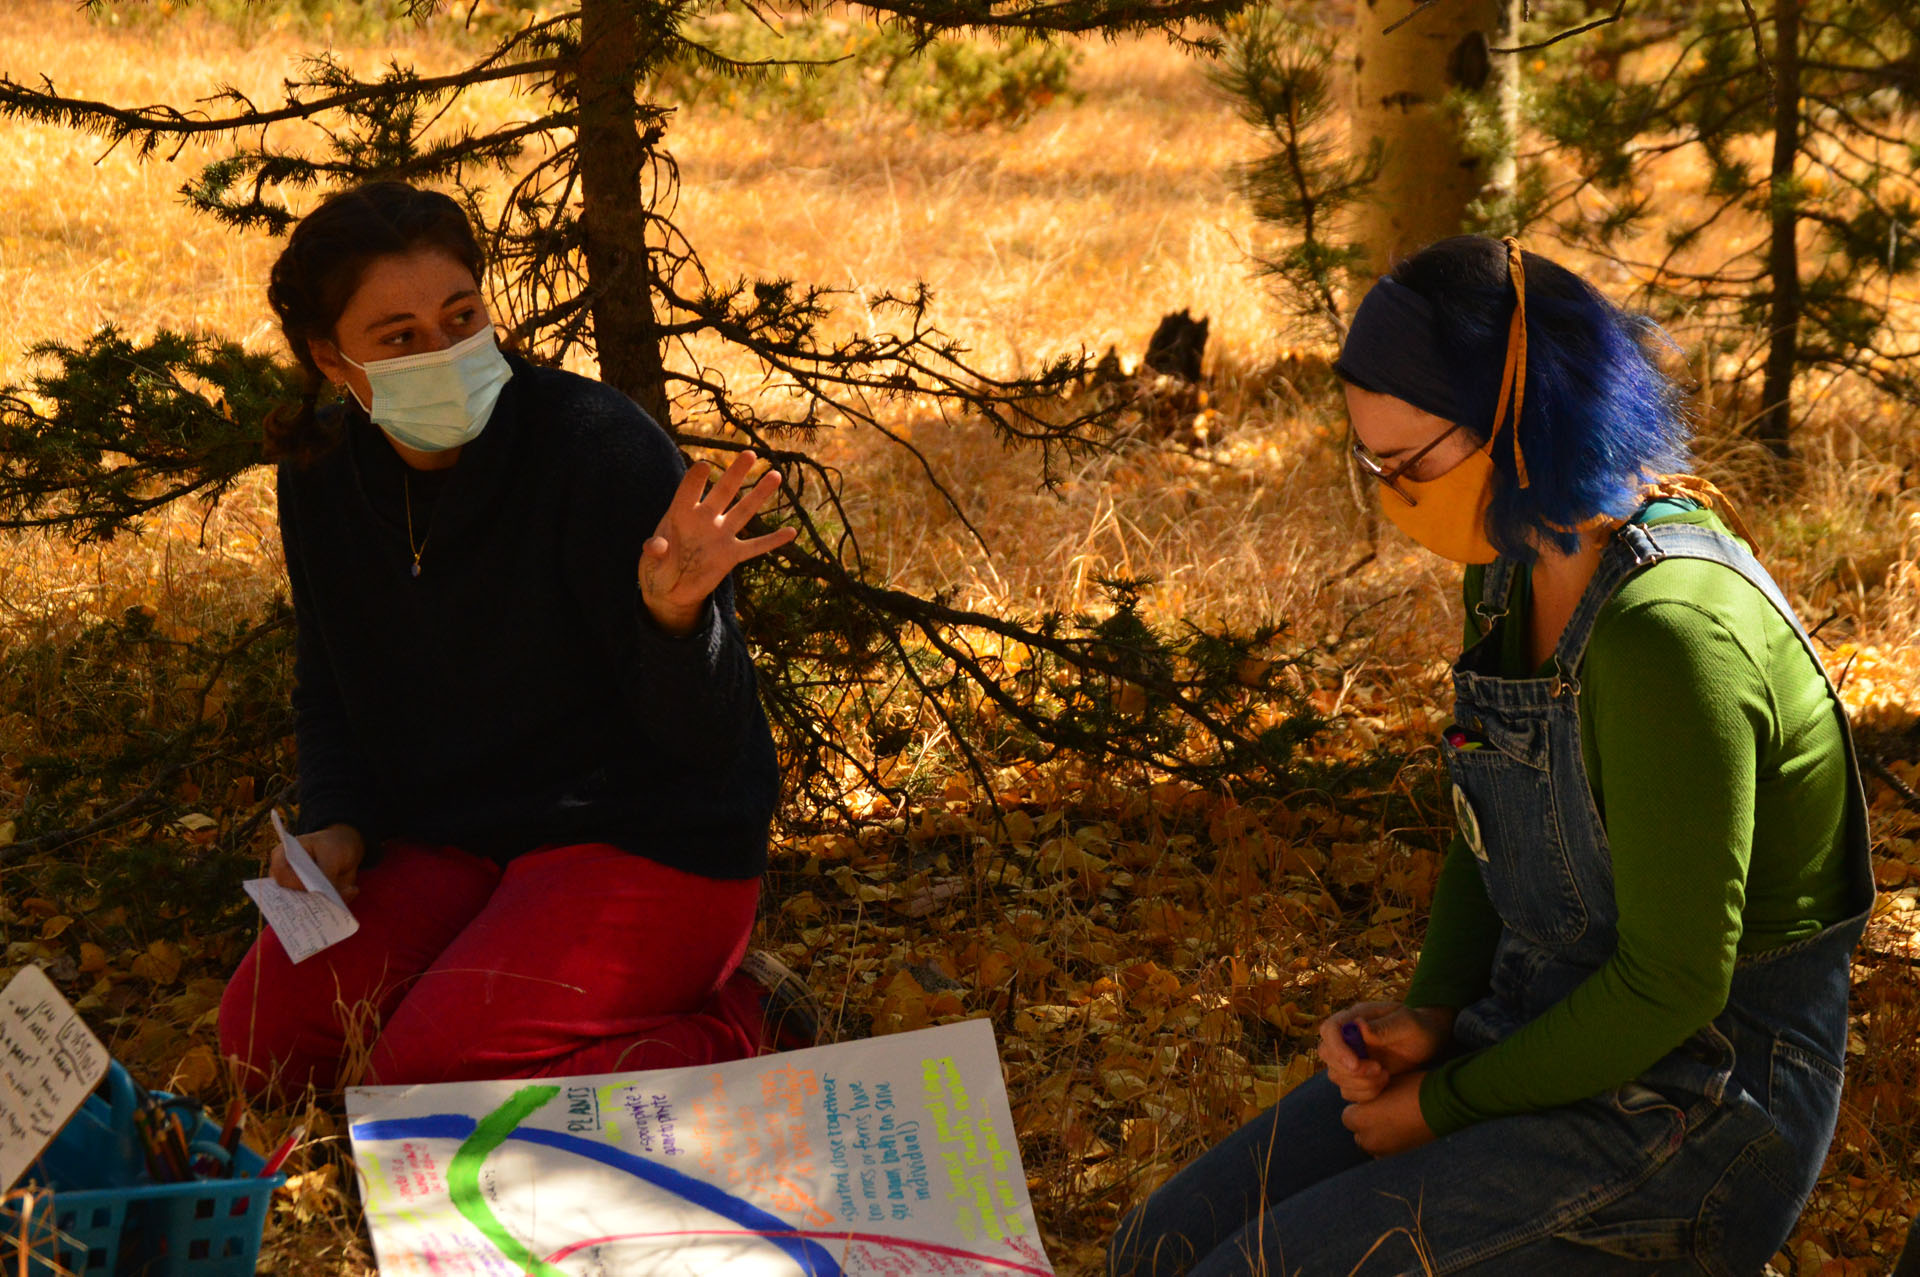 <strong>Tessa DeRose ‘22</strong> leads an outdoor lesson plan while TREE Fellow <strong>Ali McGarigal ‘19</strong> observes. Photo by <strong>Juan Miguel Arias ‘12</strong>.